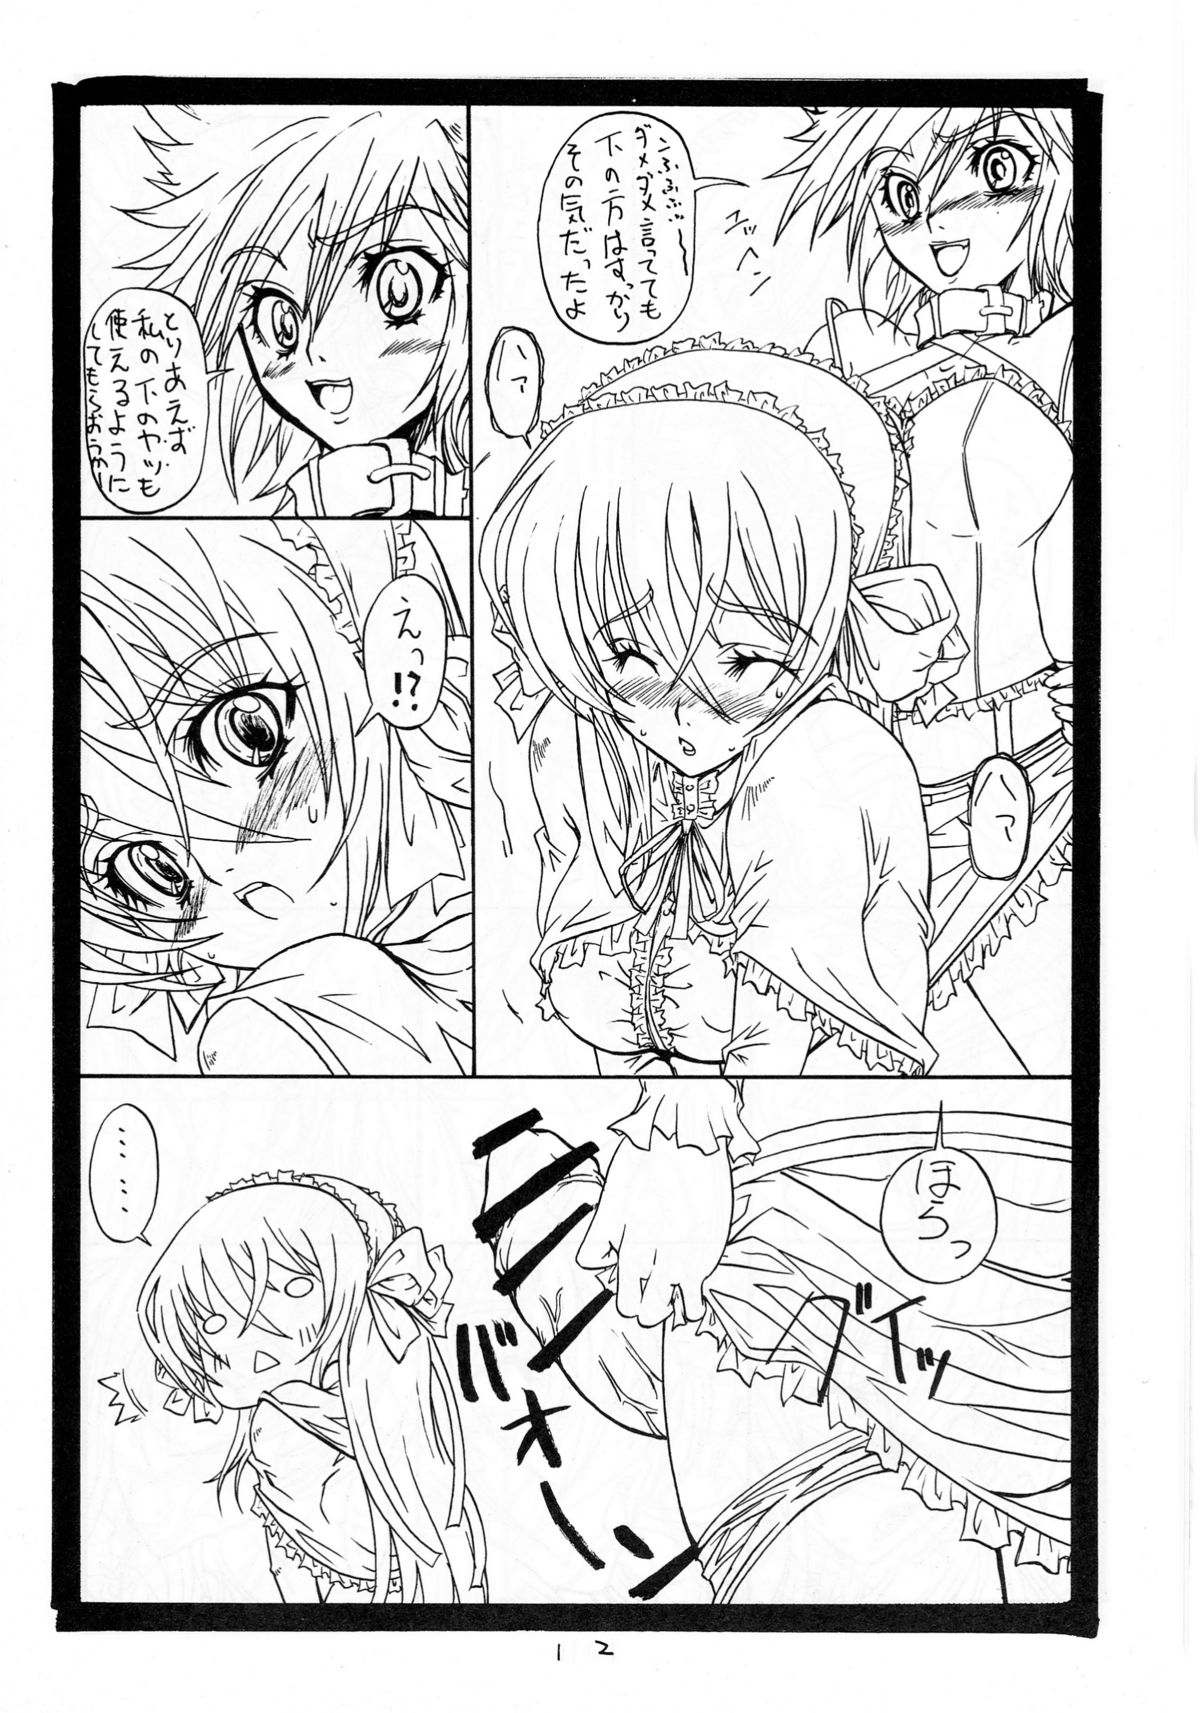 (C71) [S-G.H. (Oona Mitsutoshi)] SUICIDA DESESPERACION (Coyote Ragtime Show) page 12 full